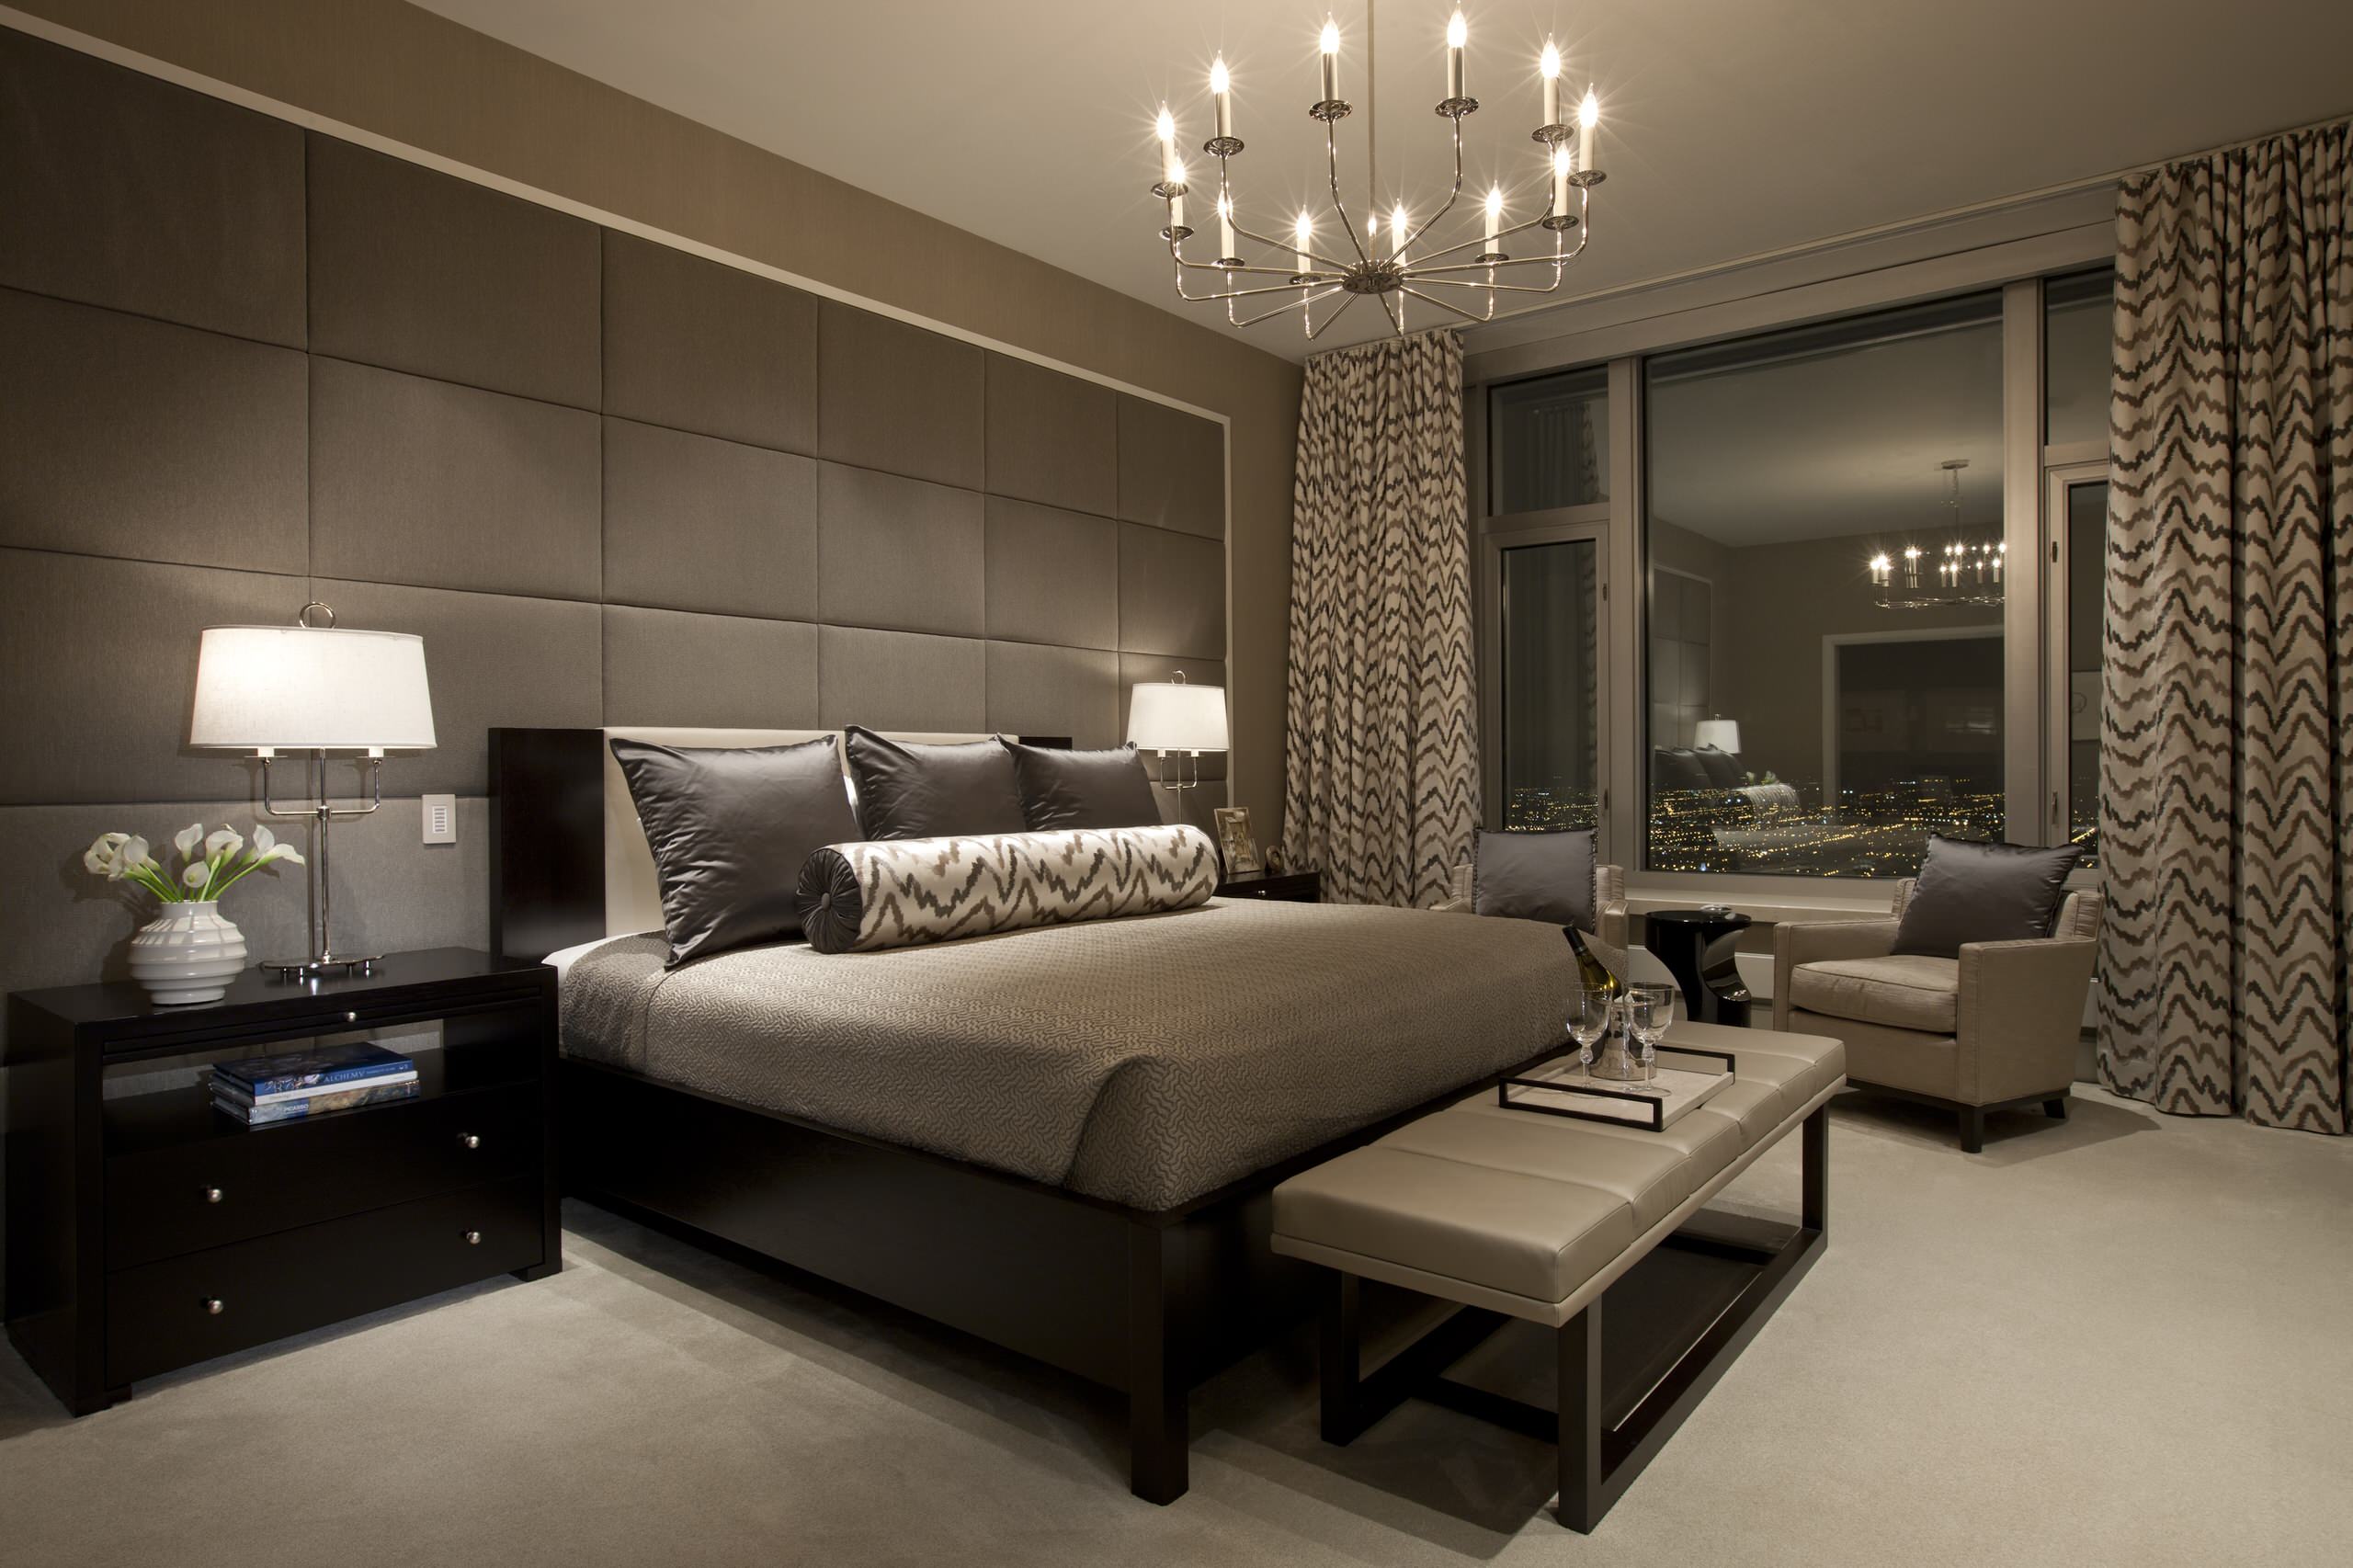 75 Brown Carpeted Bedroom Ideas You'll Love - September, 2023 | Houzz